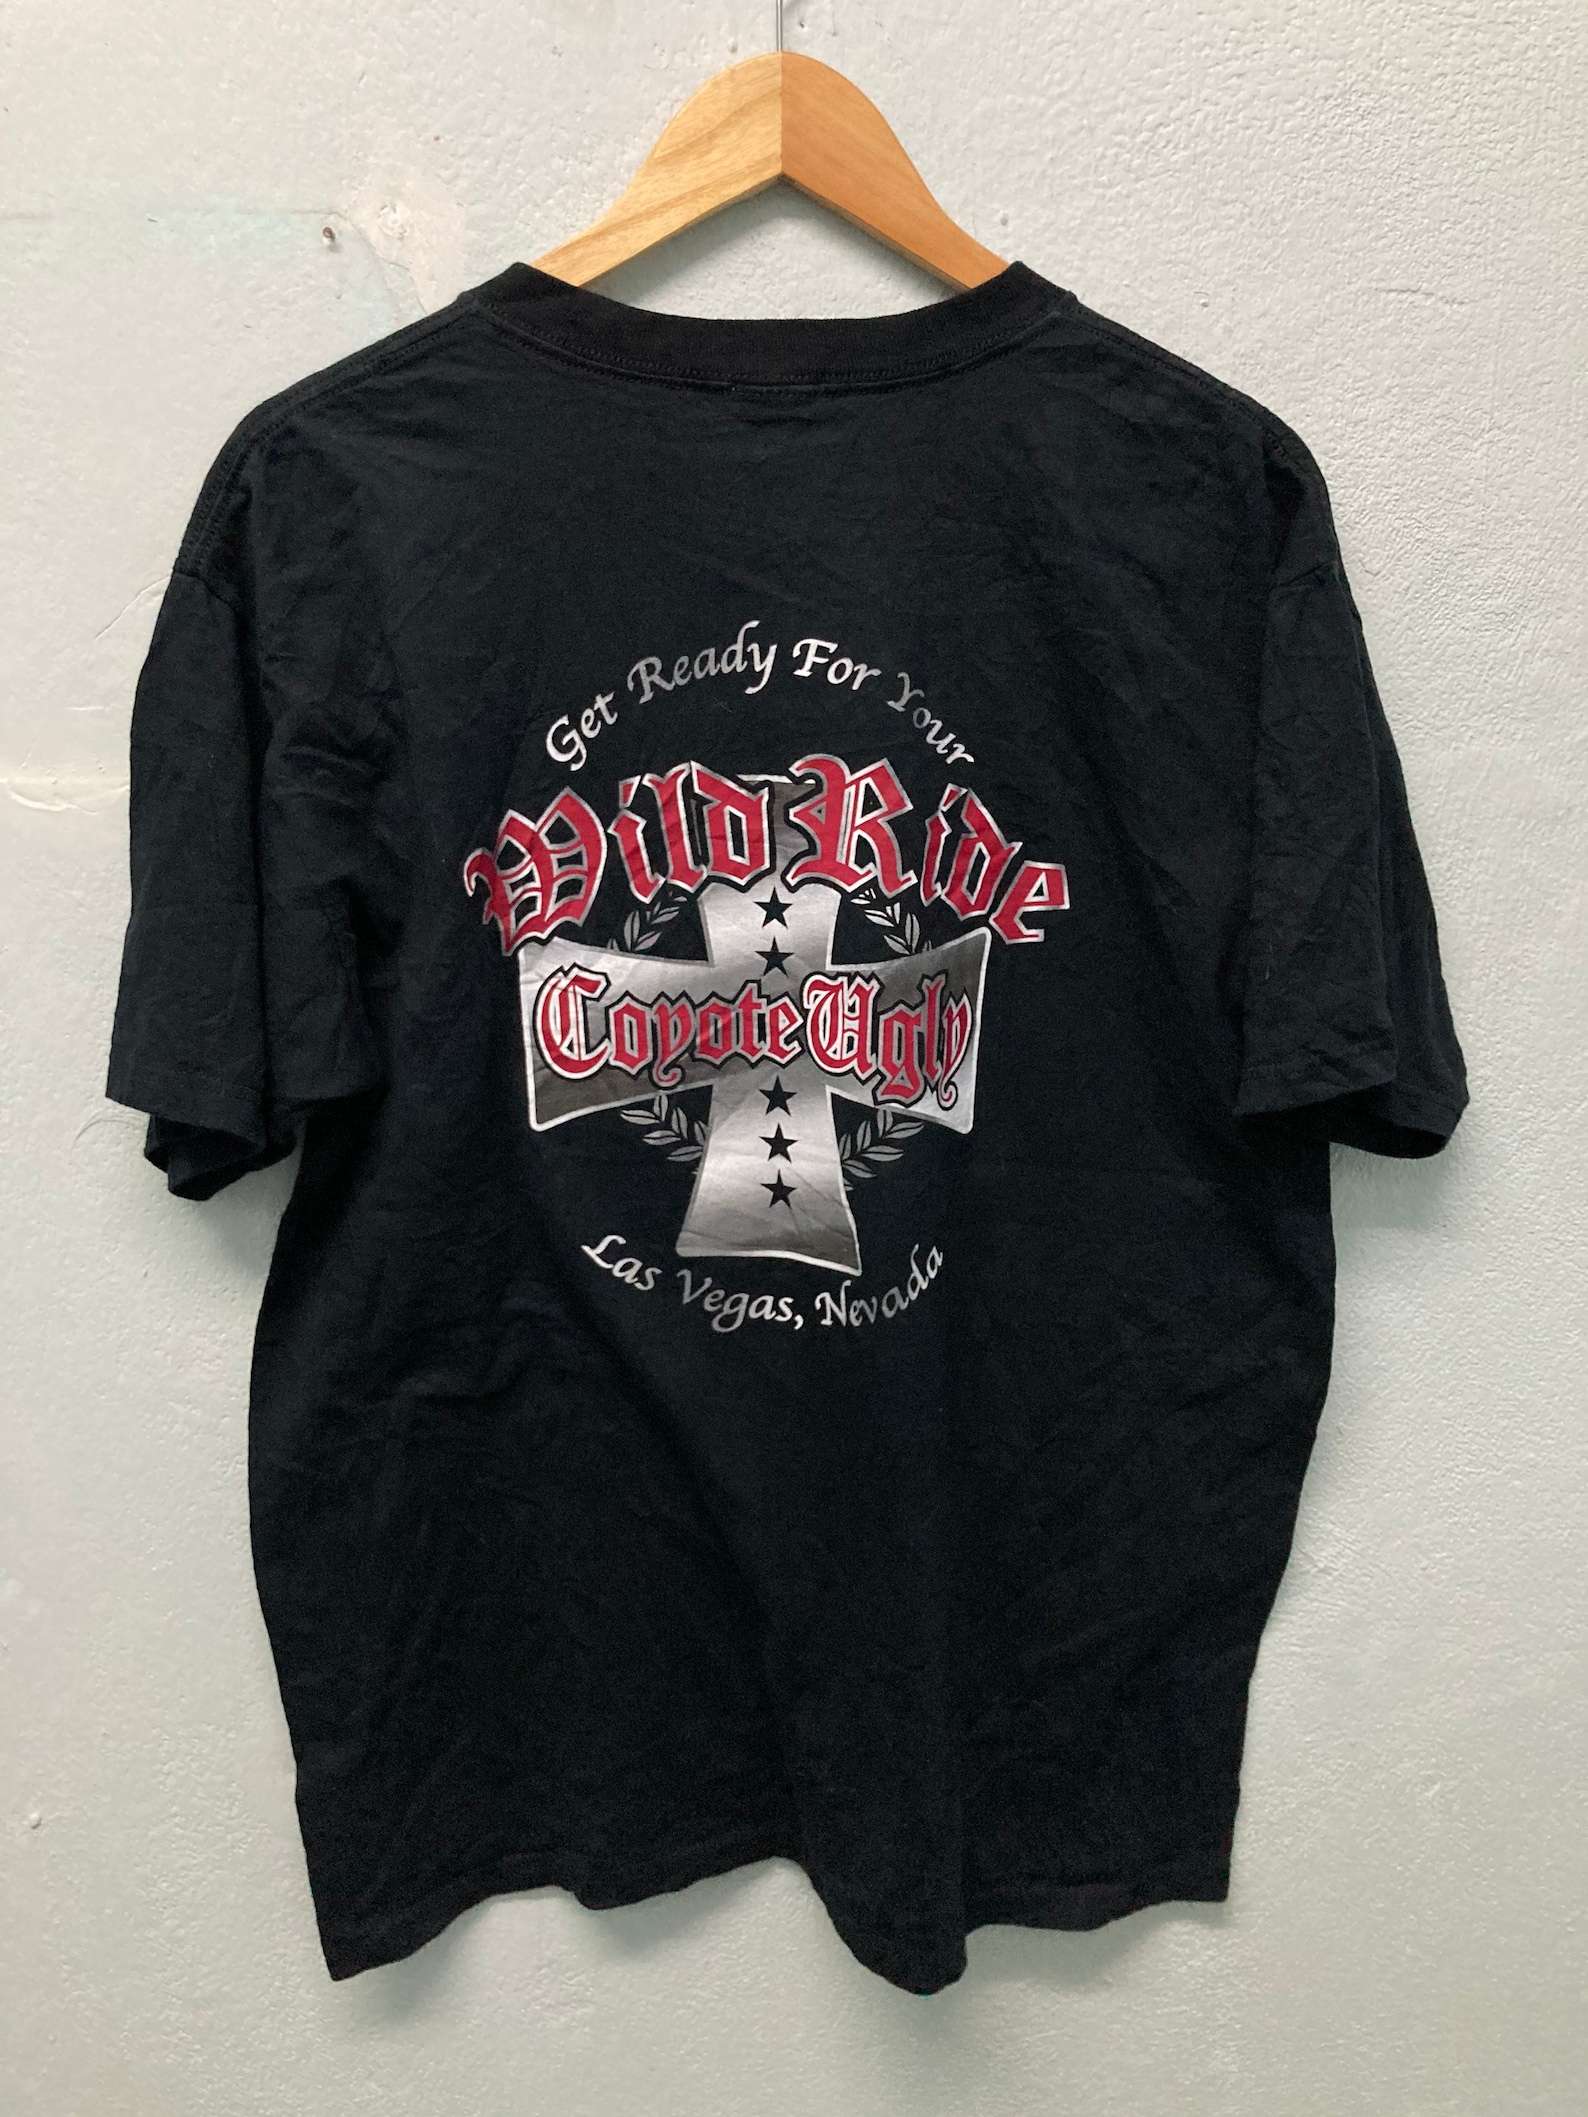 Vintage Coyote Ugly T-shirt Size L - Etsy